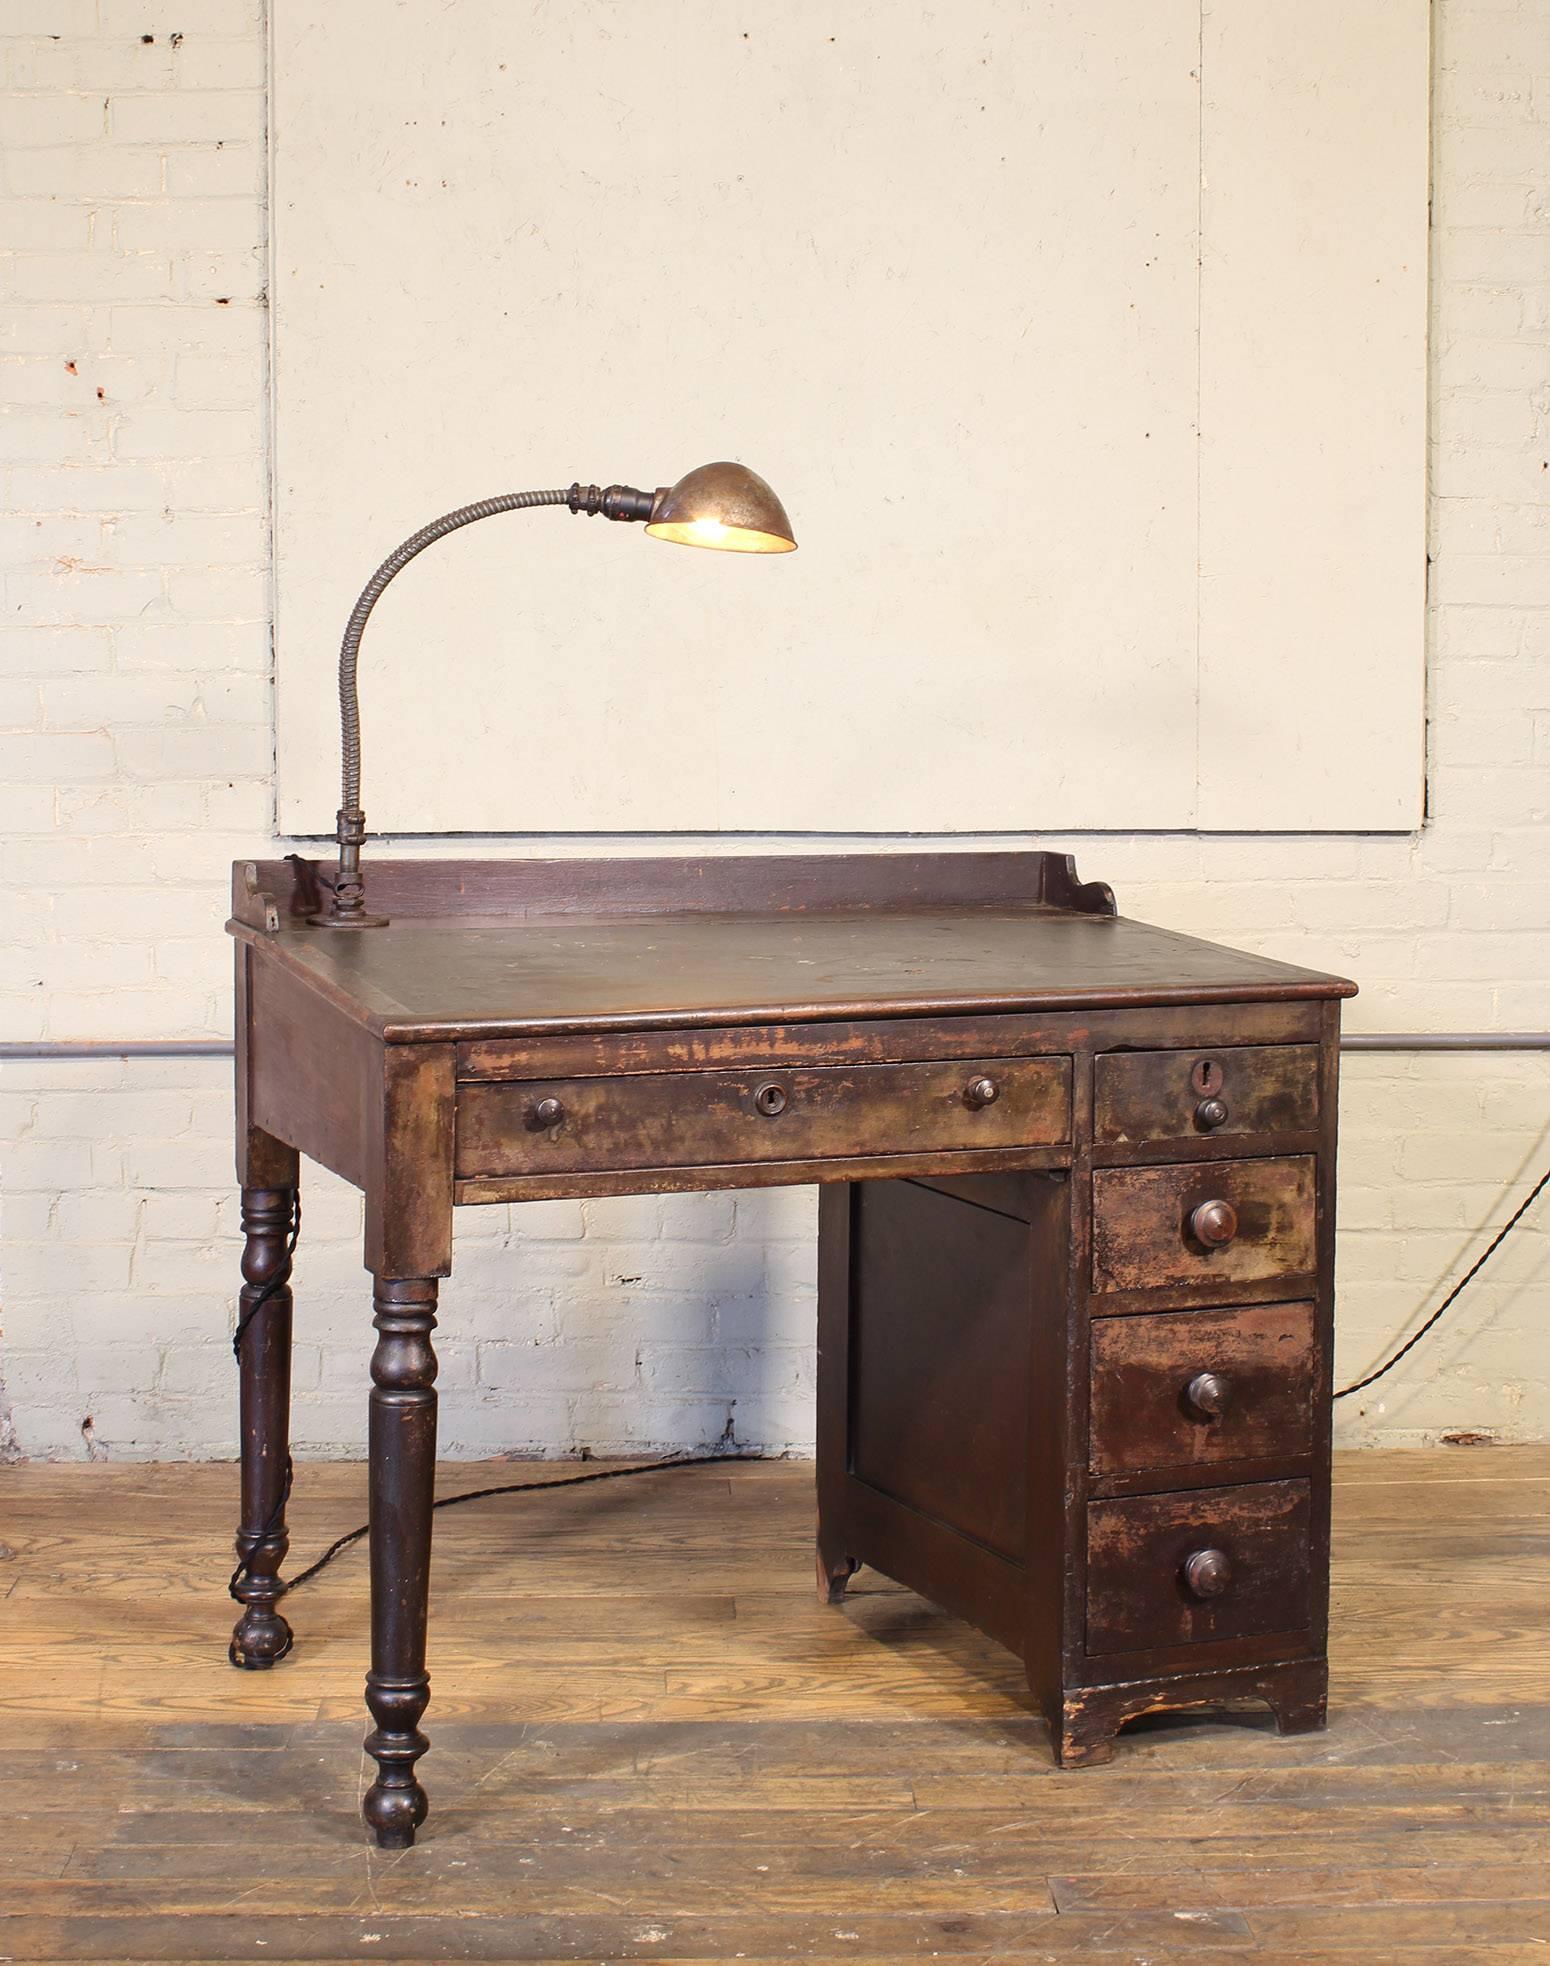 Vintage authentic 1940s clerk's work bench / desk / table. Features an adjustable desk lamp that pre-dates goose-neck. Sloped top with weathered leather insert. Five drawers and turned legs. Desk measures 39 3/4